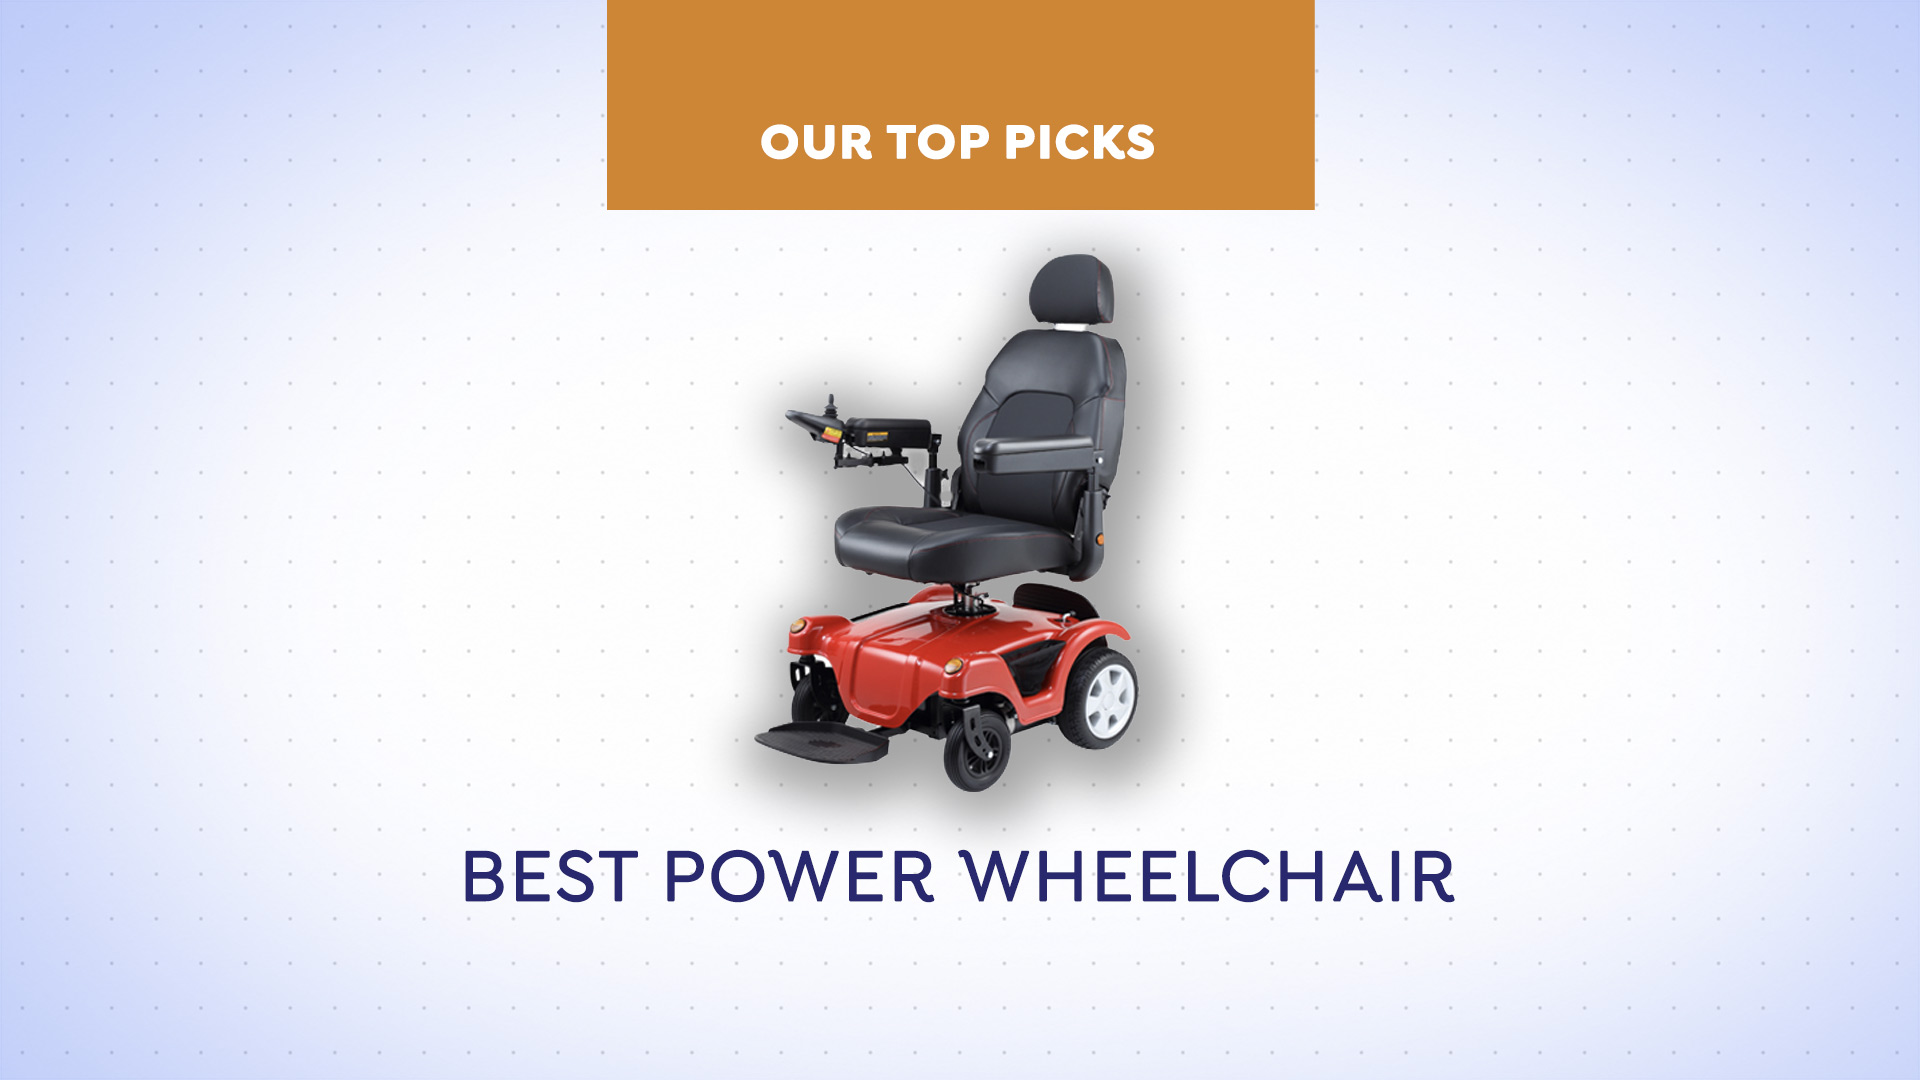 Best Power Wheelchair for aging and loss of mobility